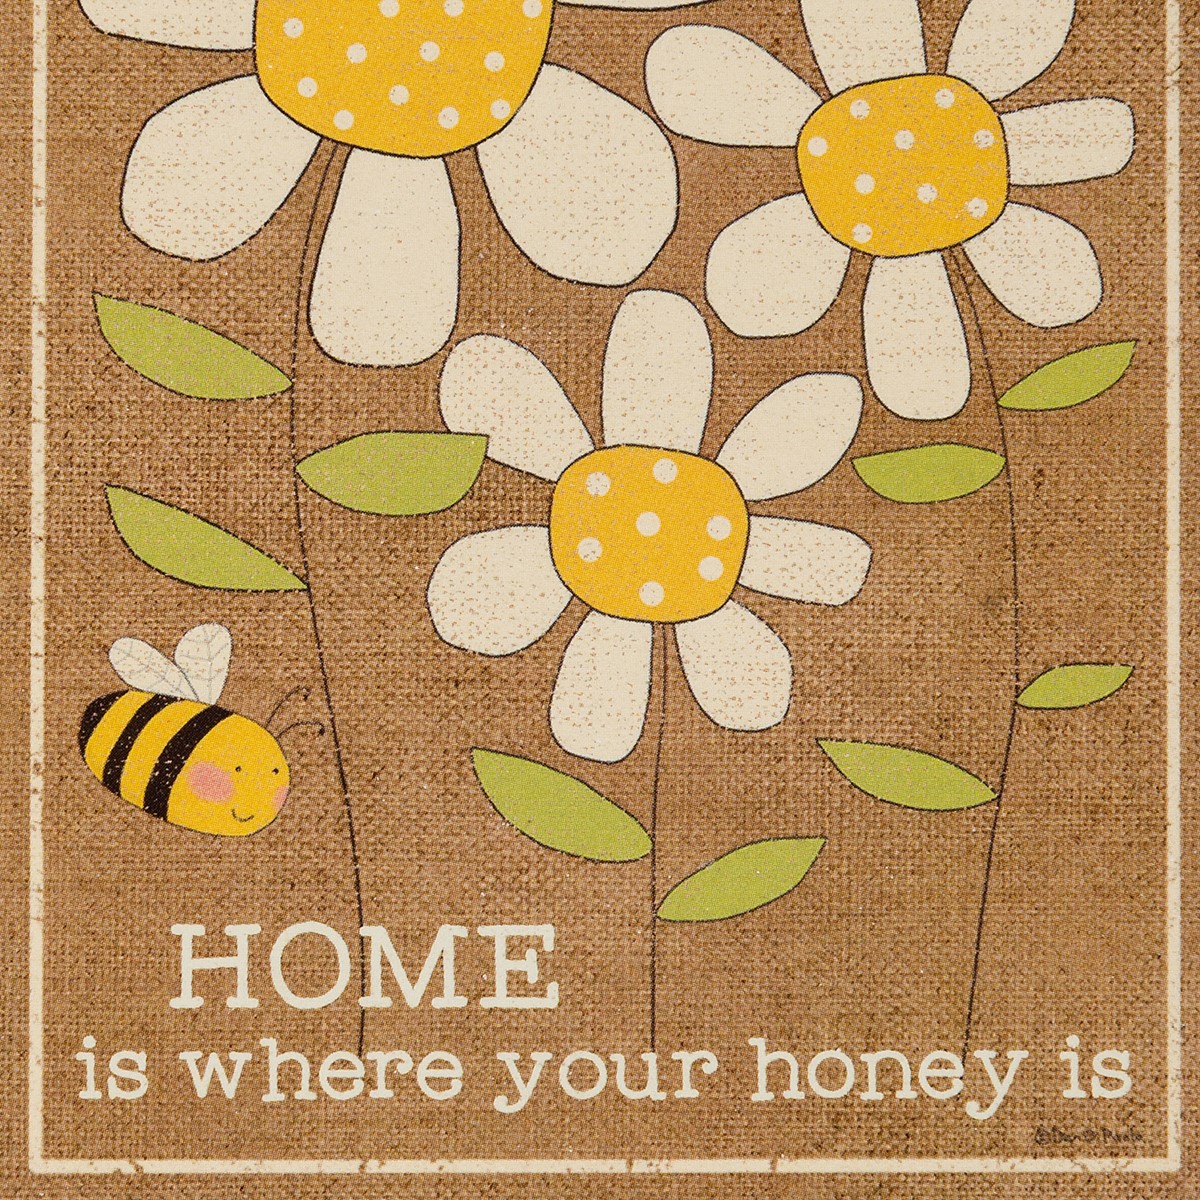 Home Is Where Your Honey Is Magnet Set - Wood, Paper, Metal, Magnet